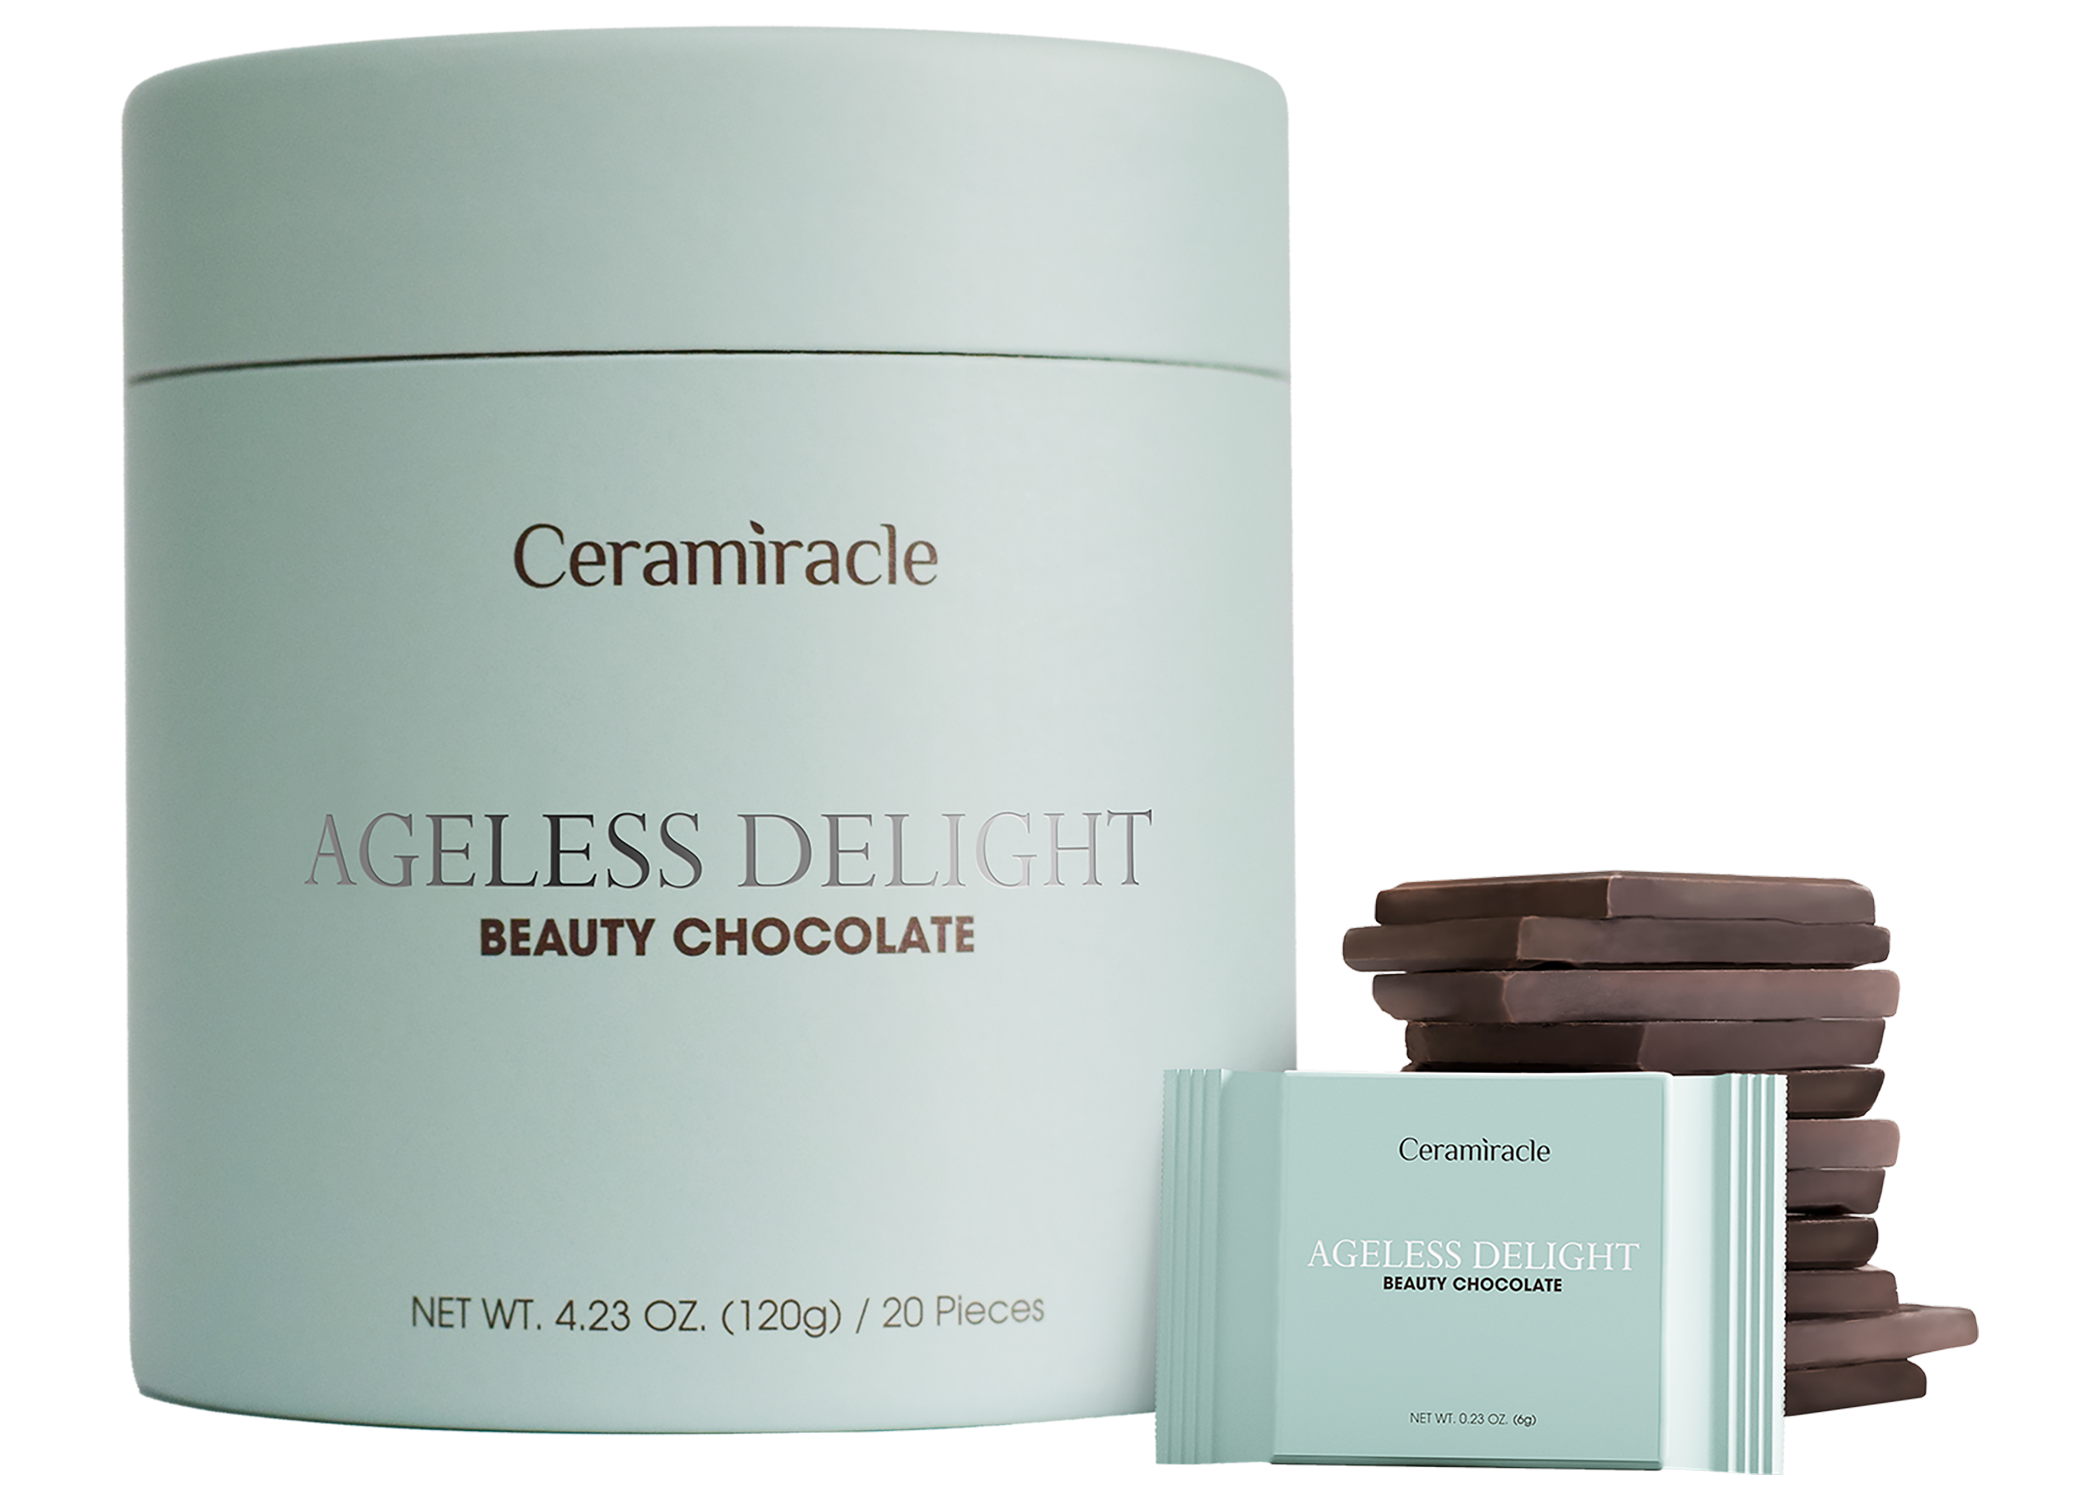 Ceramiracle Ageless Delight Beauty Chocolate